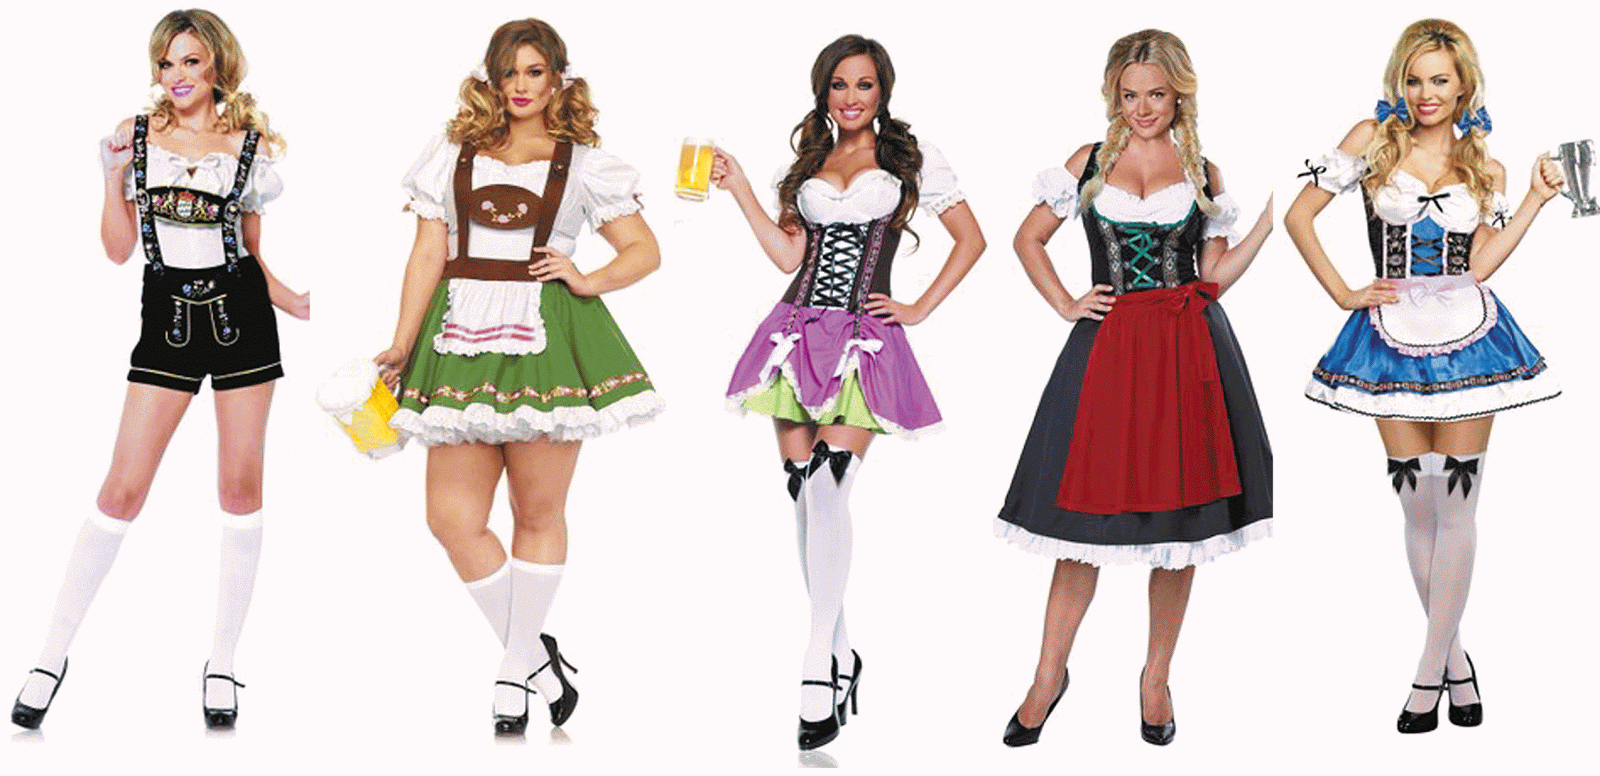 German bar maiden outfit